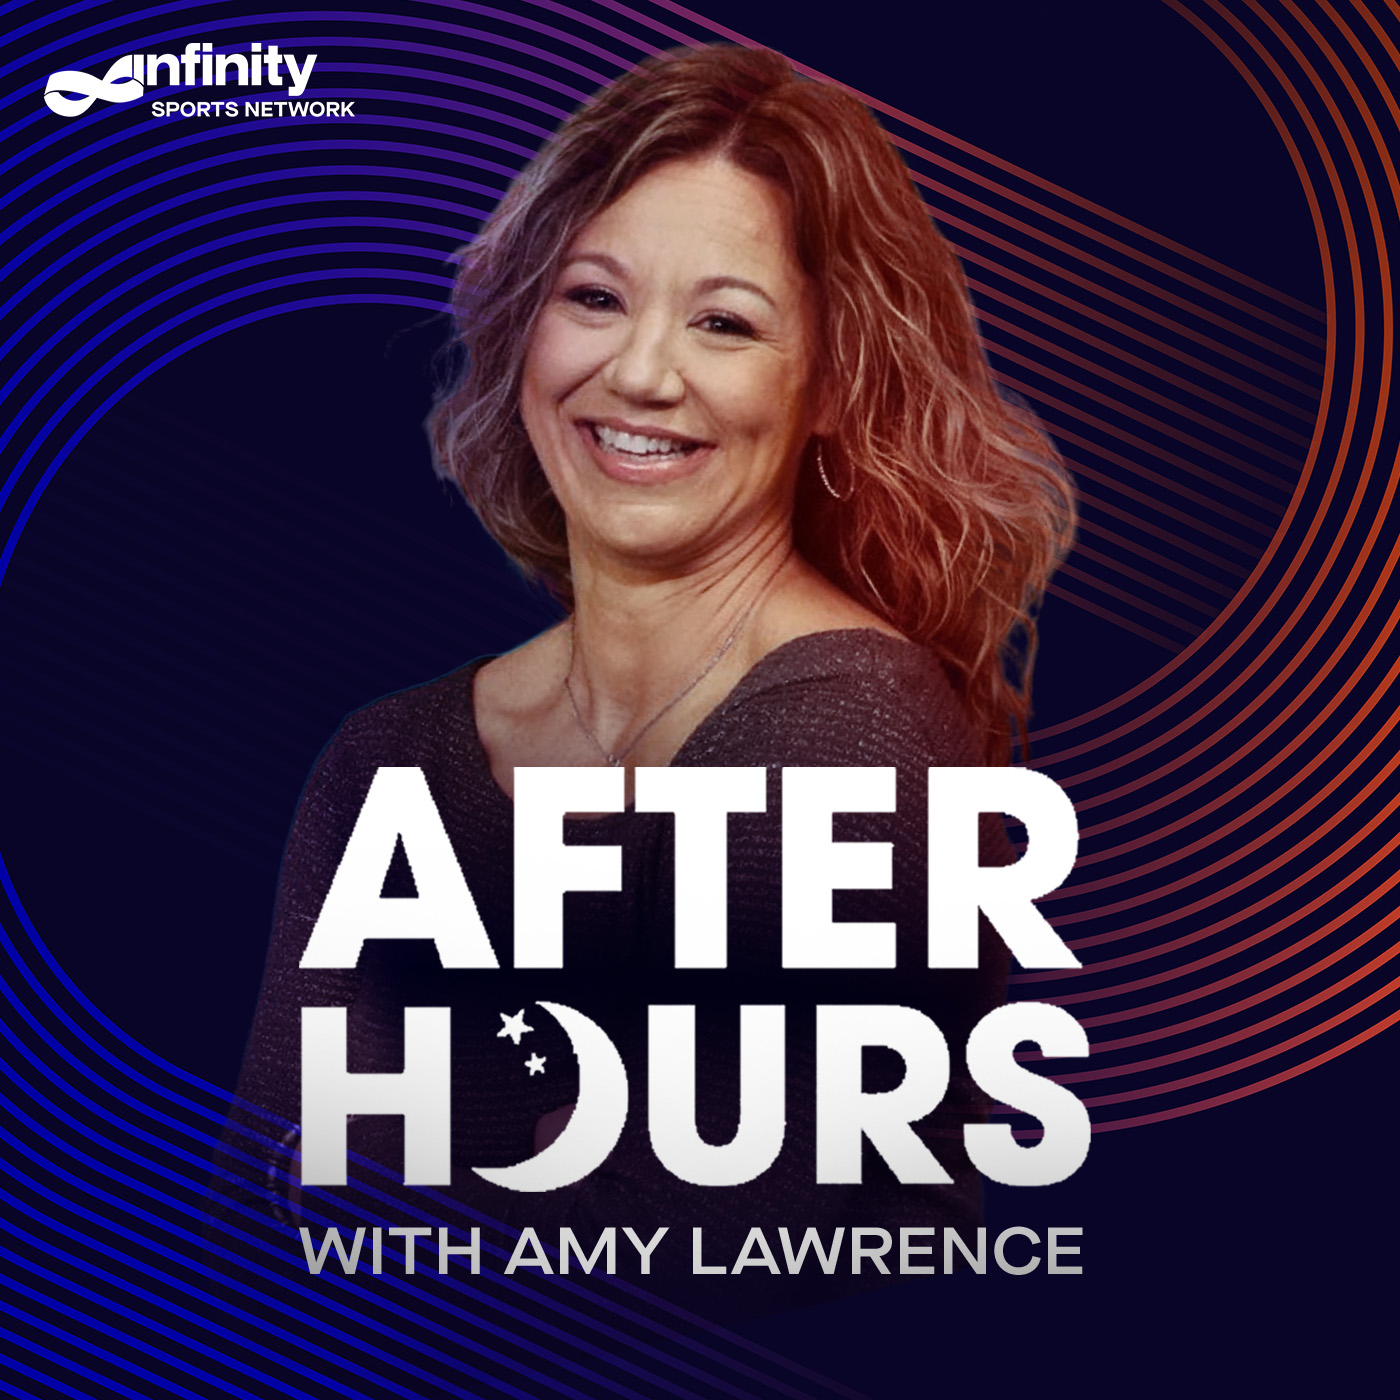 6/16/21 After Hours with Amy Lawrence PODCAST: Hour 4